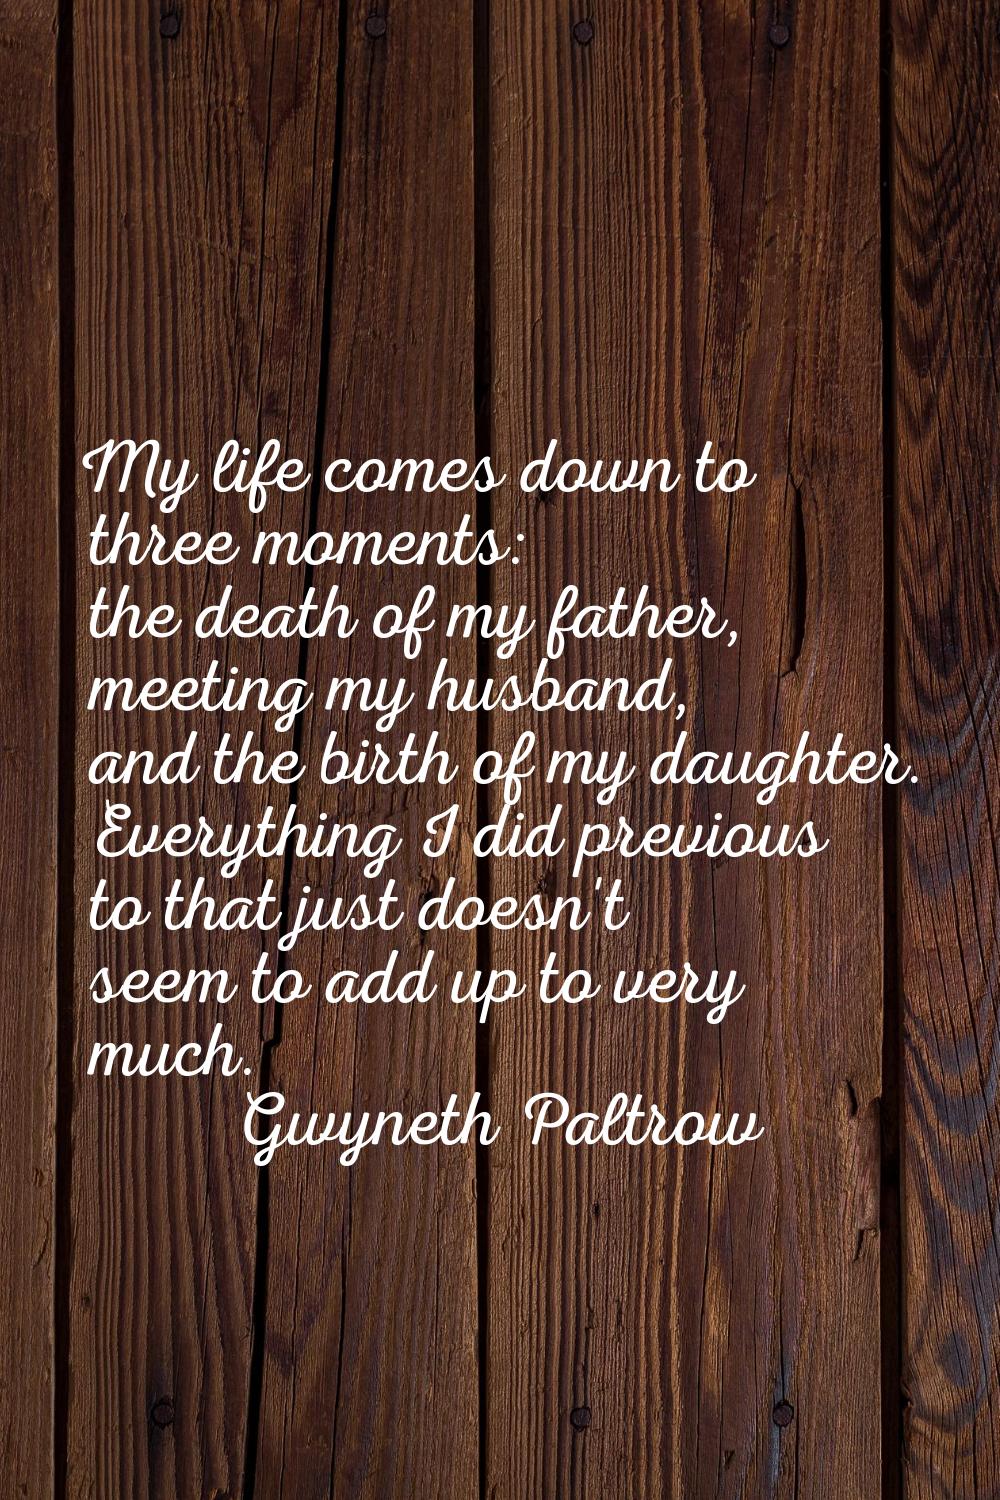 My life comes down to three moments: the death of my father, meeting my husband, and the birth of m